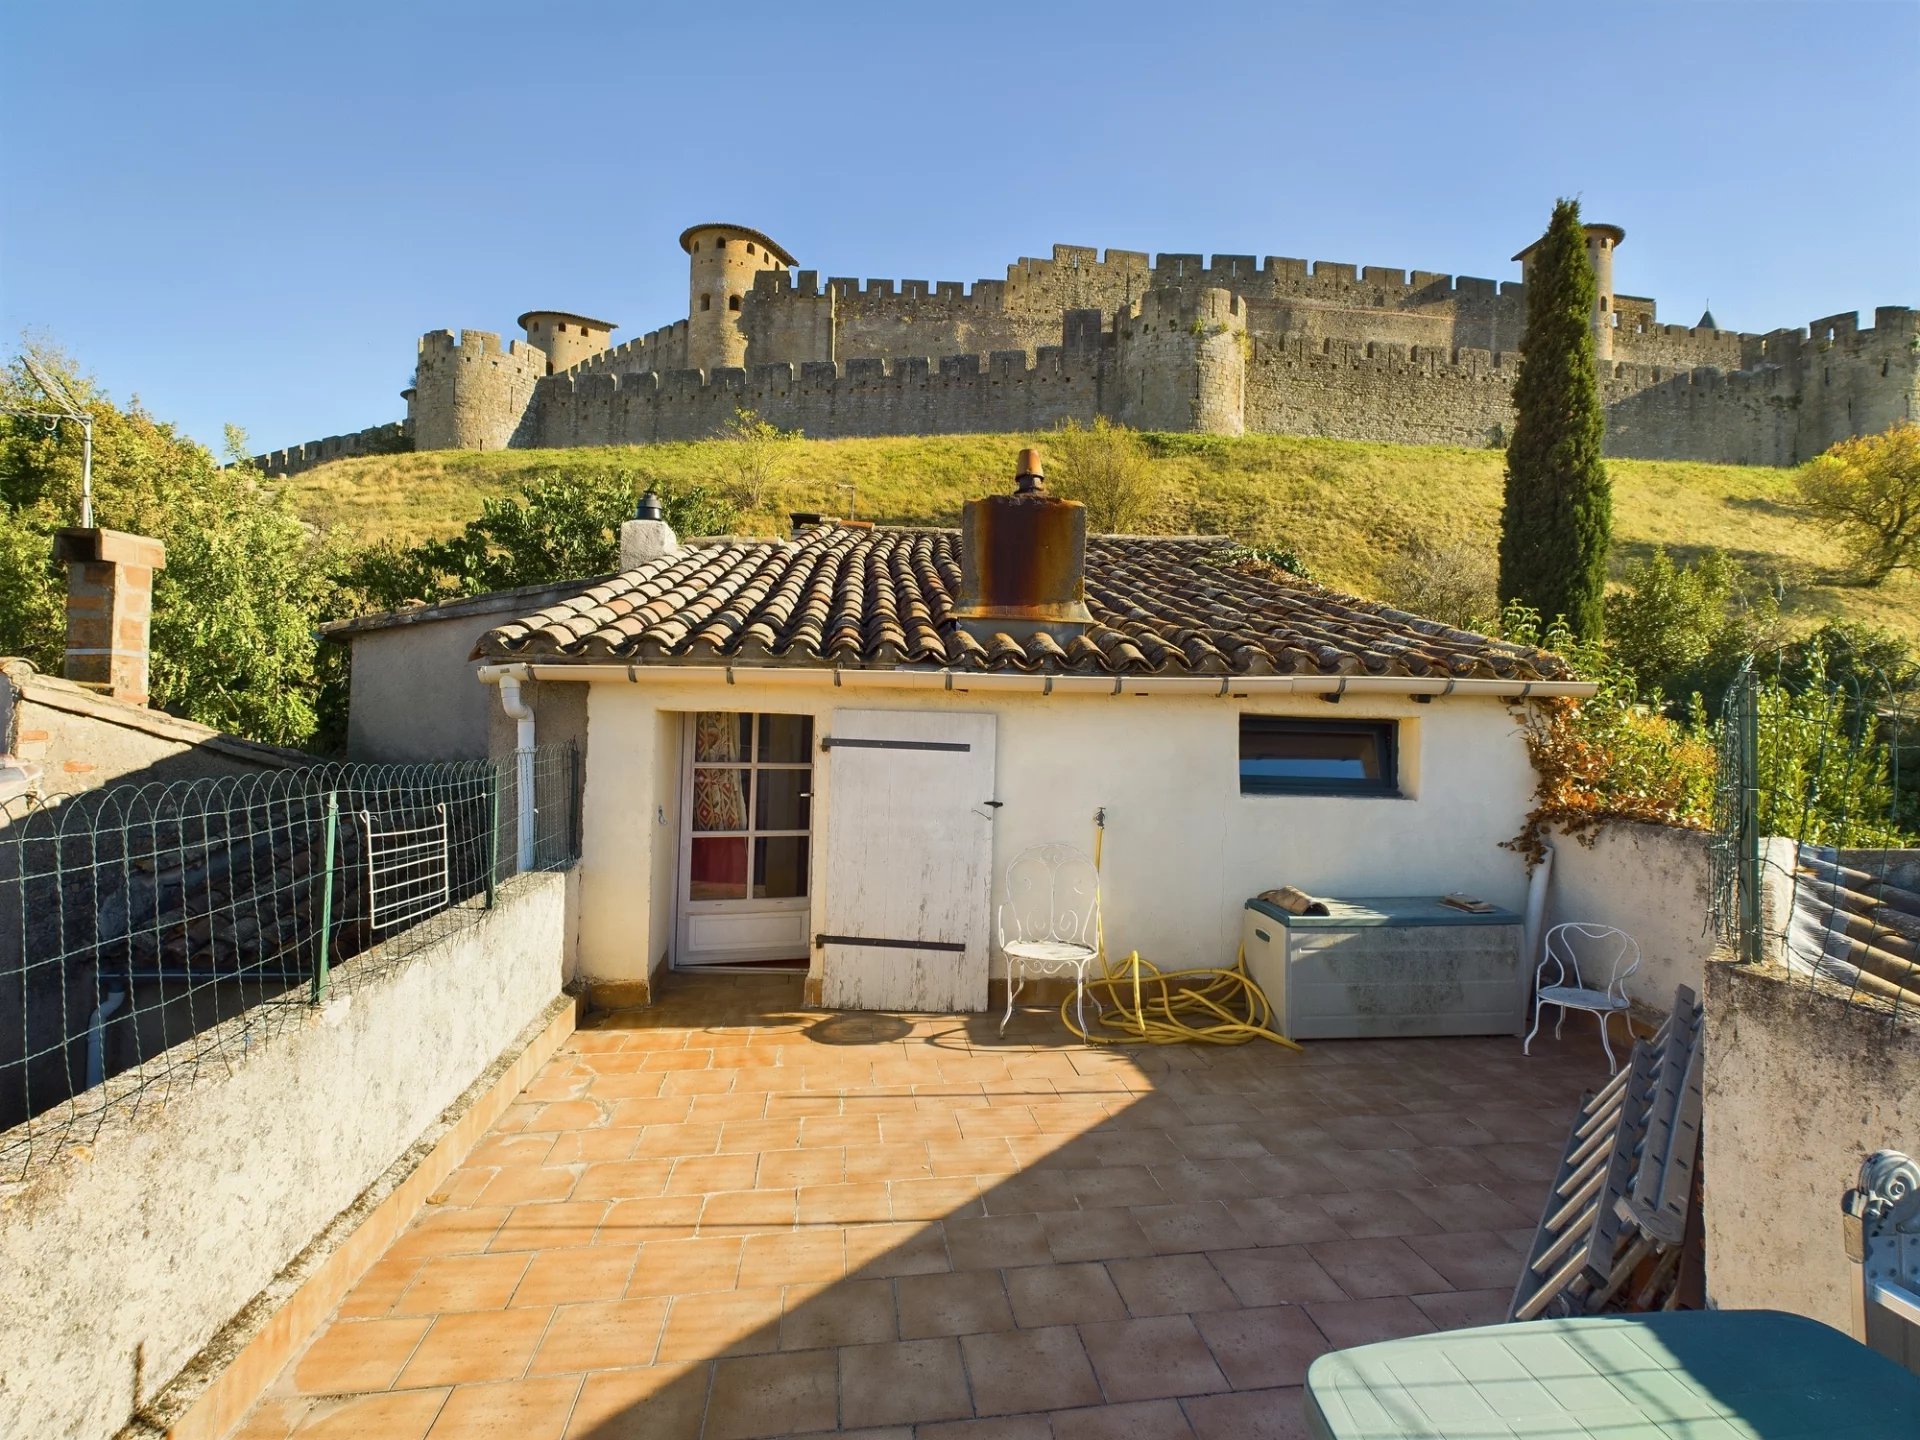 Villa at the foot of the ramparts with 2 garages, terraces and large garden